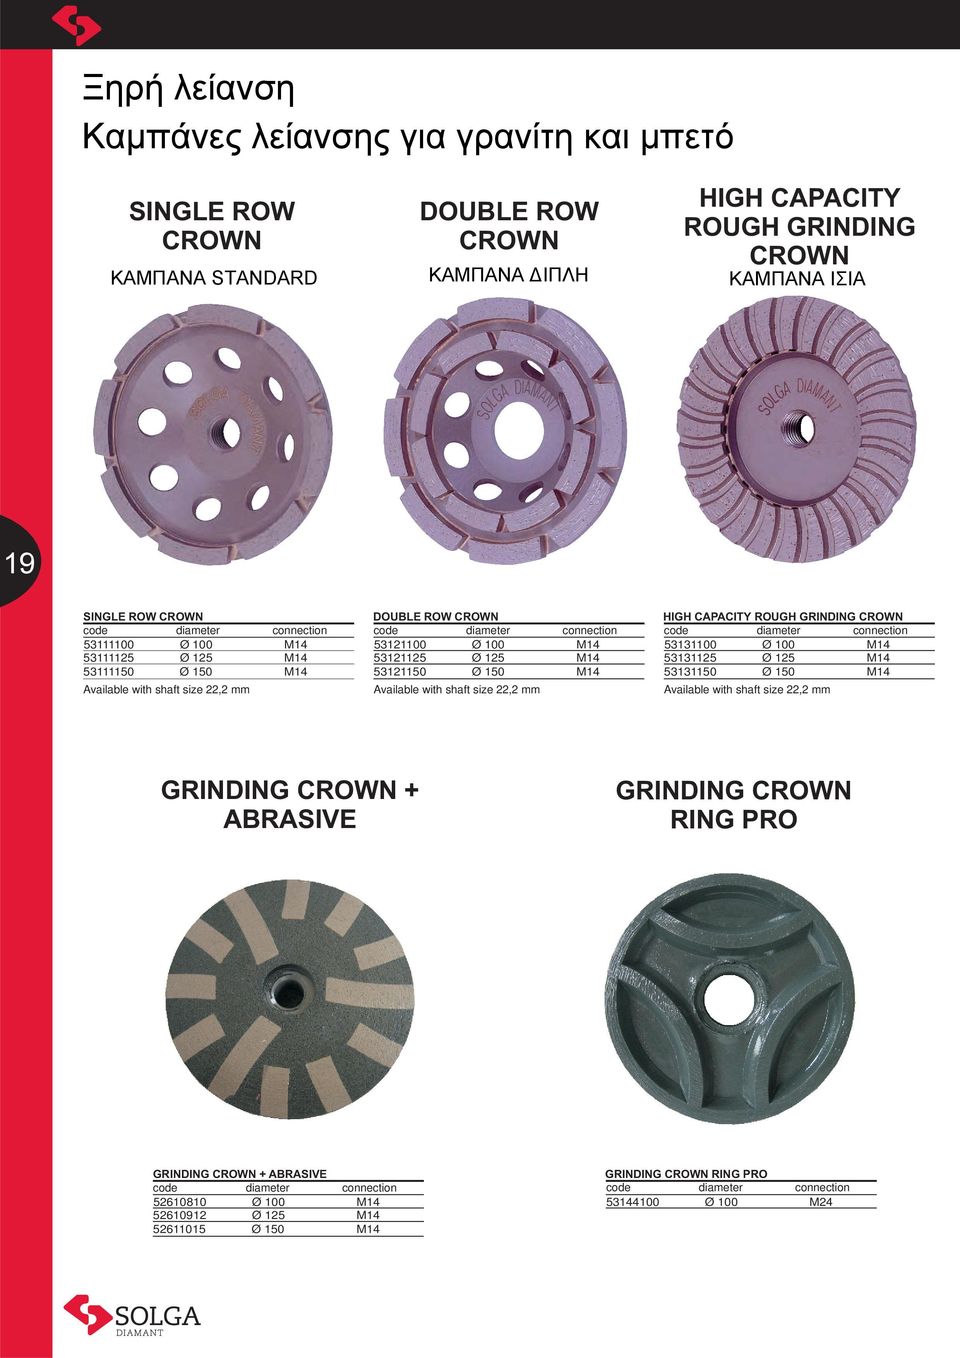 Available with shaft size mm GRINDING CROWN + ABRASIVE GRINDING CROWN + ABRASIVE 5268 Ø 0 526912 Ø 125 5261 Ø 0 connection M14 M14 M14 connection M14 M14 M14 IG CAPACIY ROUG